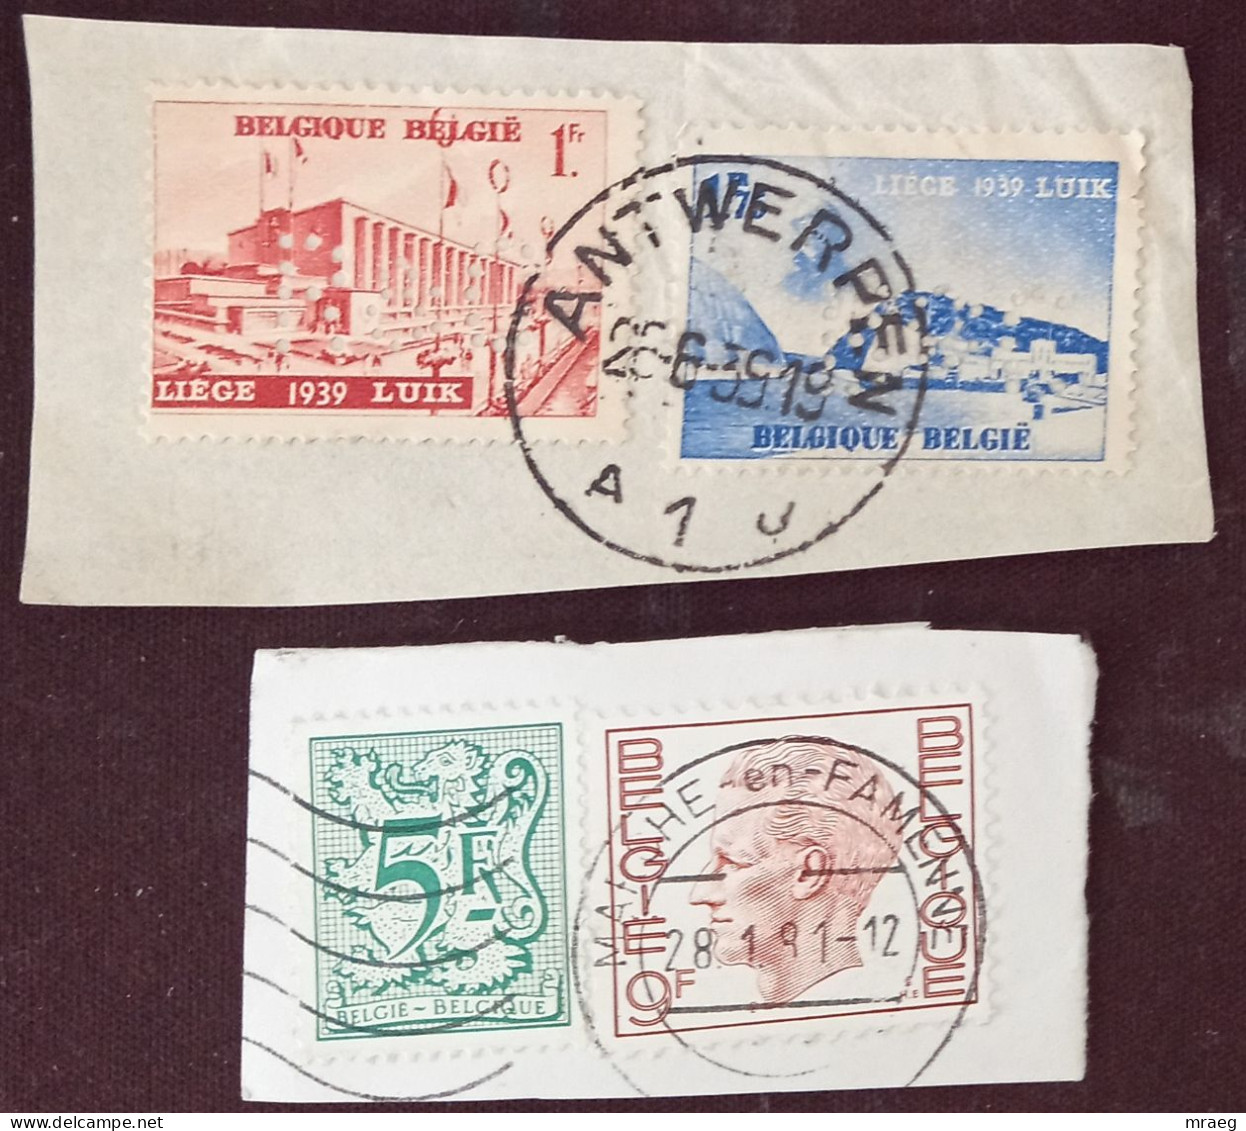 BELGIUM  1939 & 1981 TWO FRAGMENTS   F VF - Covers & Documents